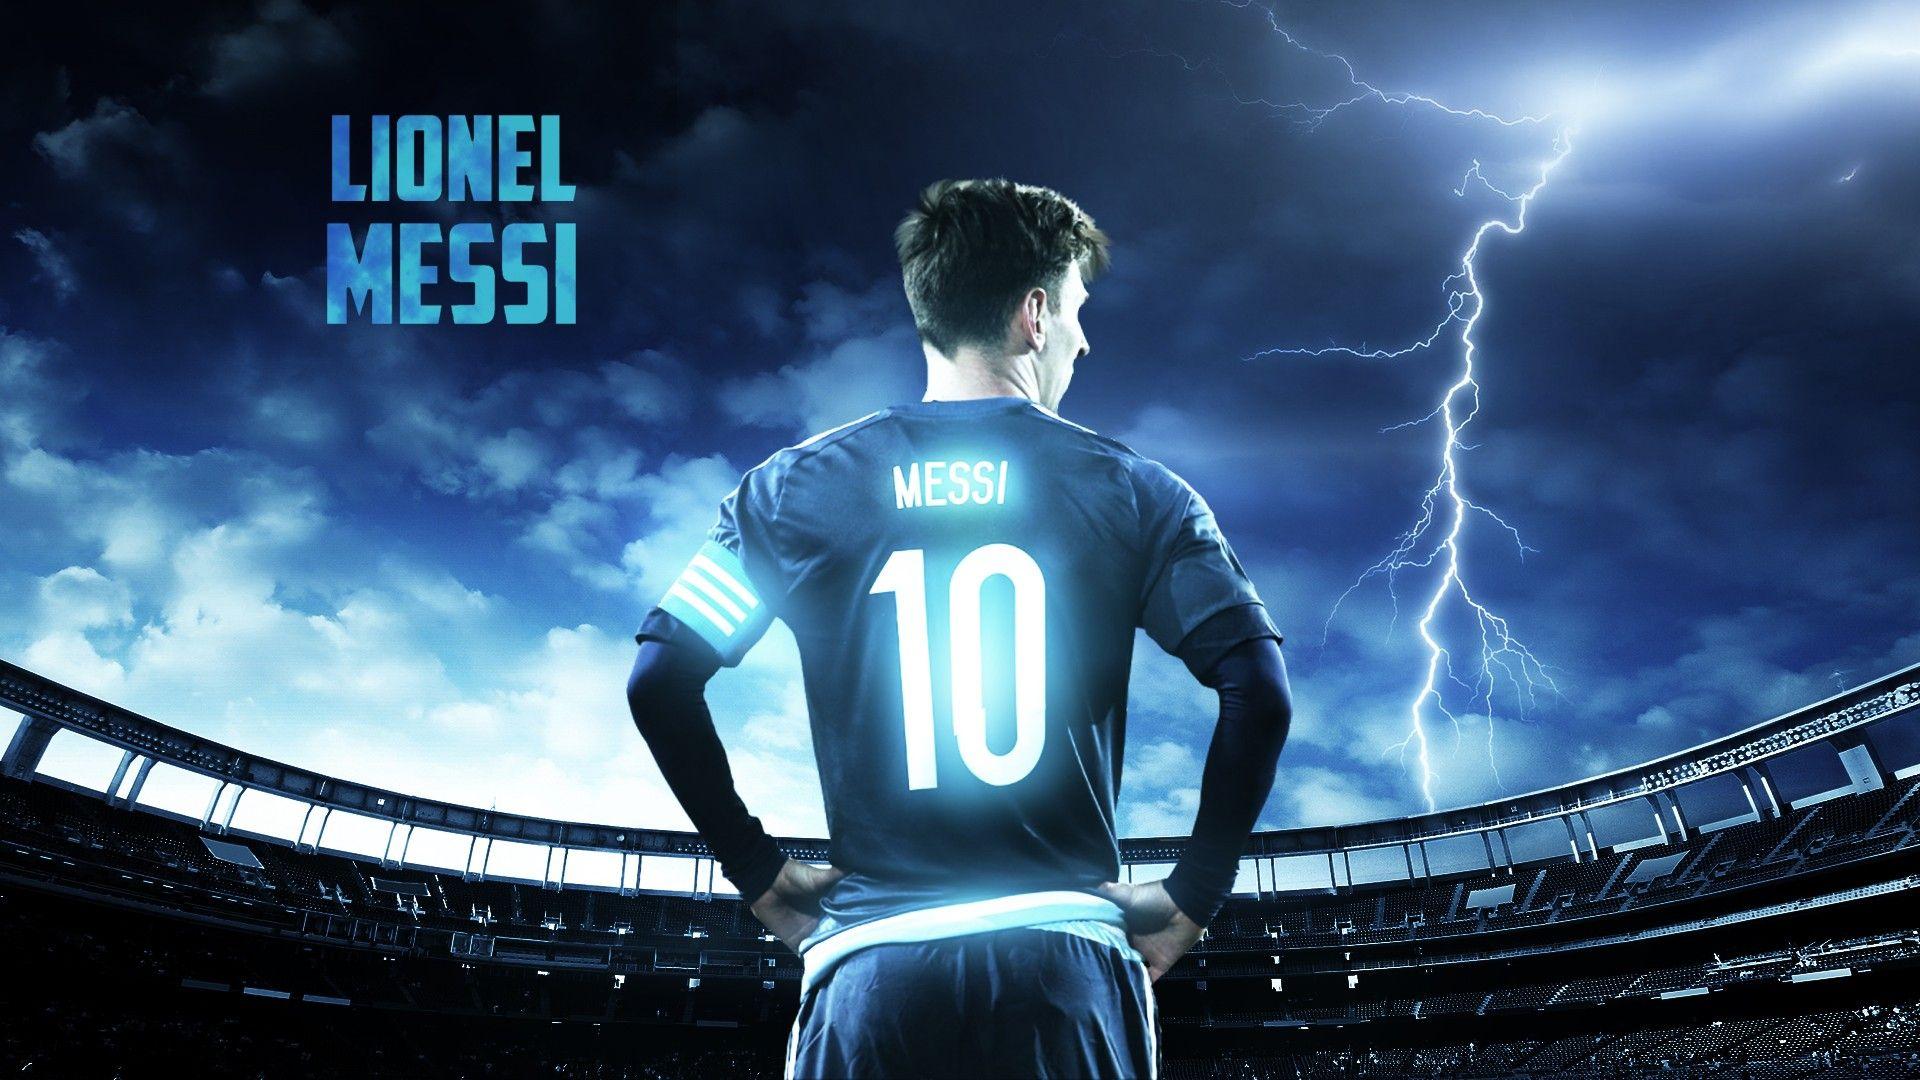 lionel messi wallpapers hd 4k 35